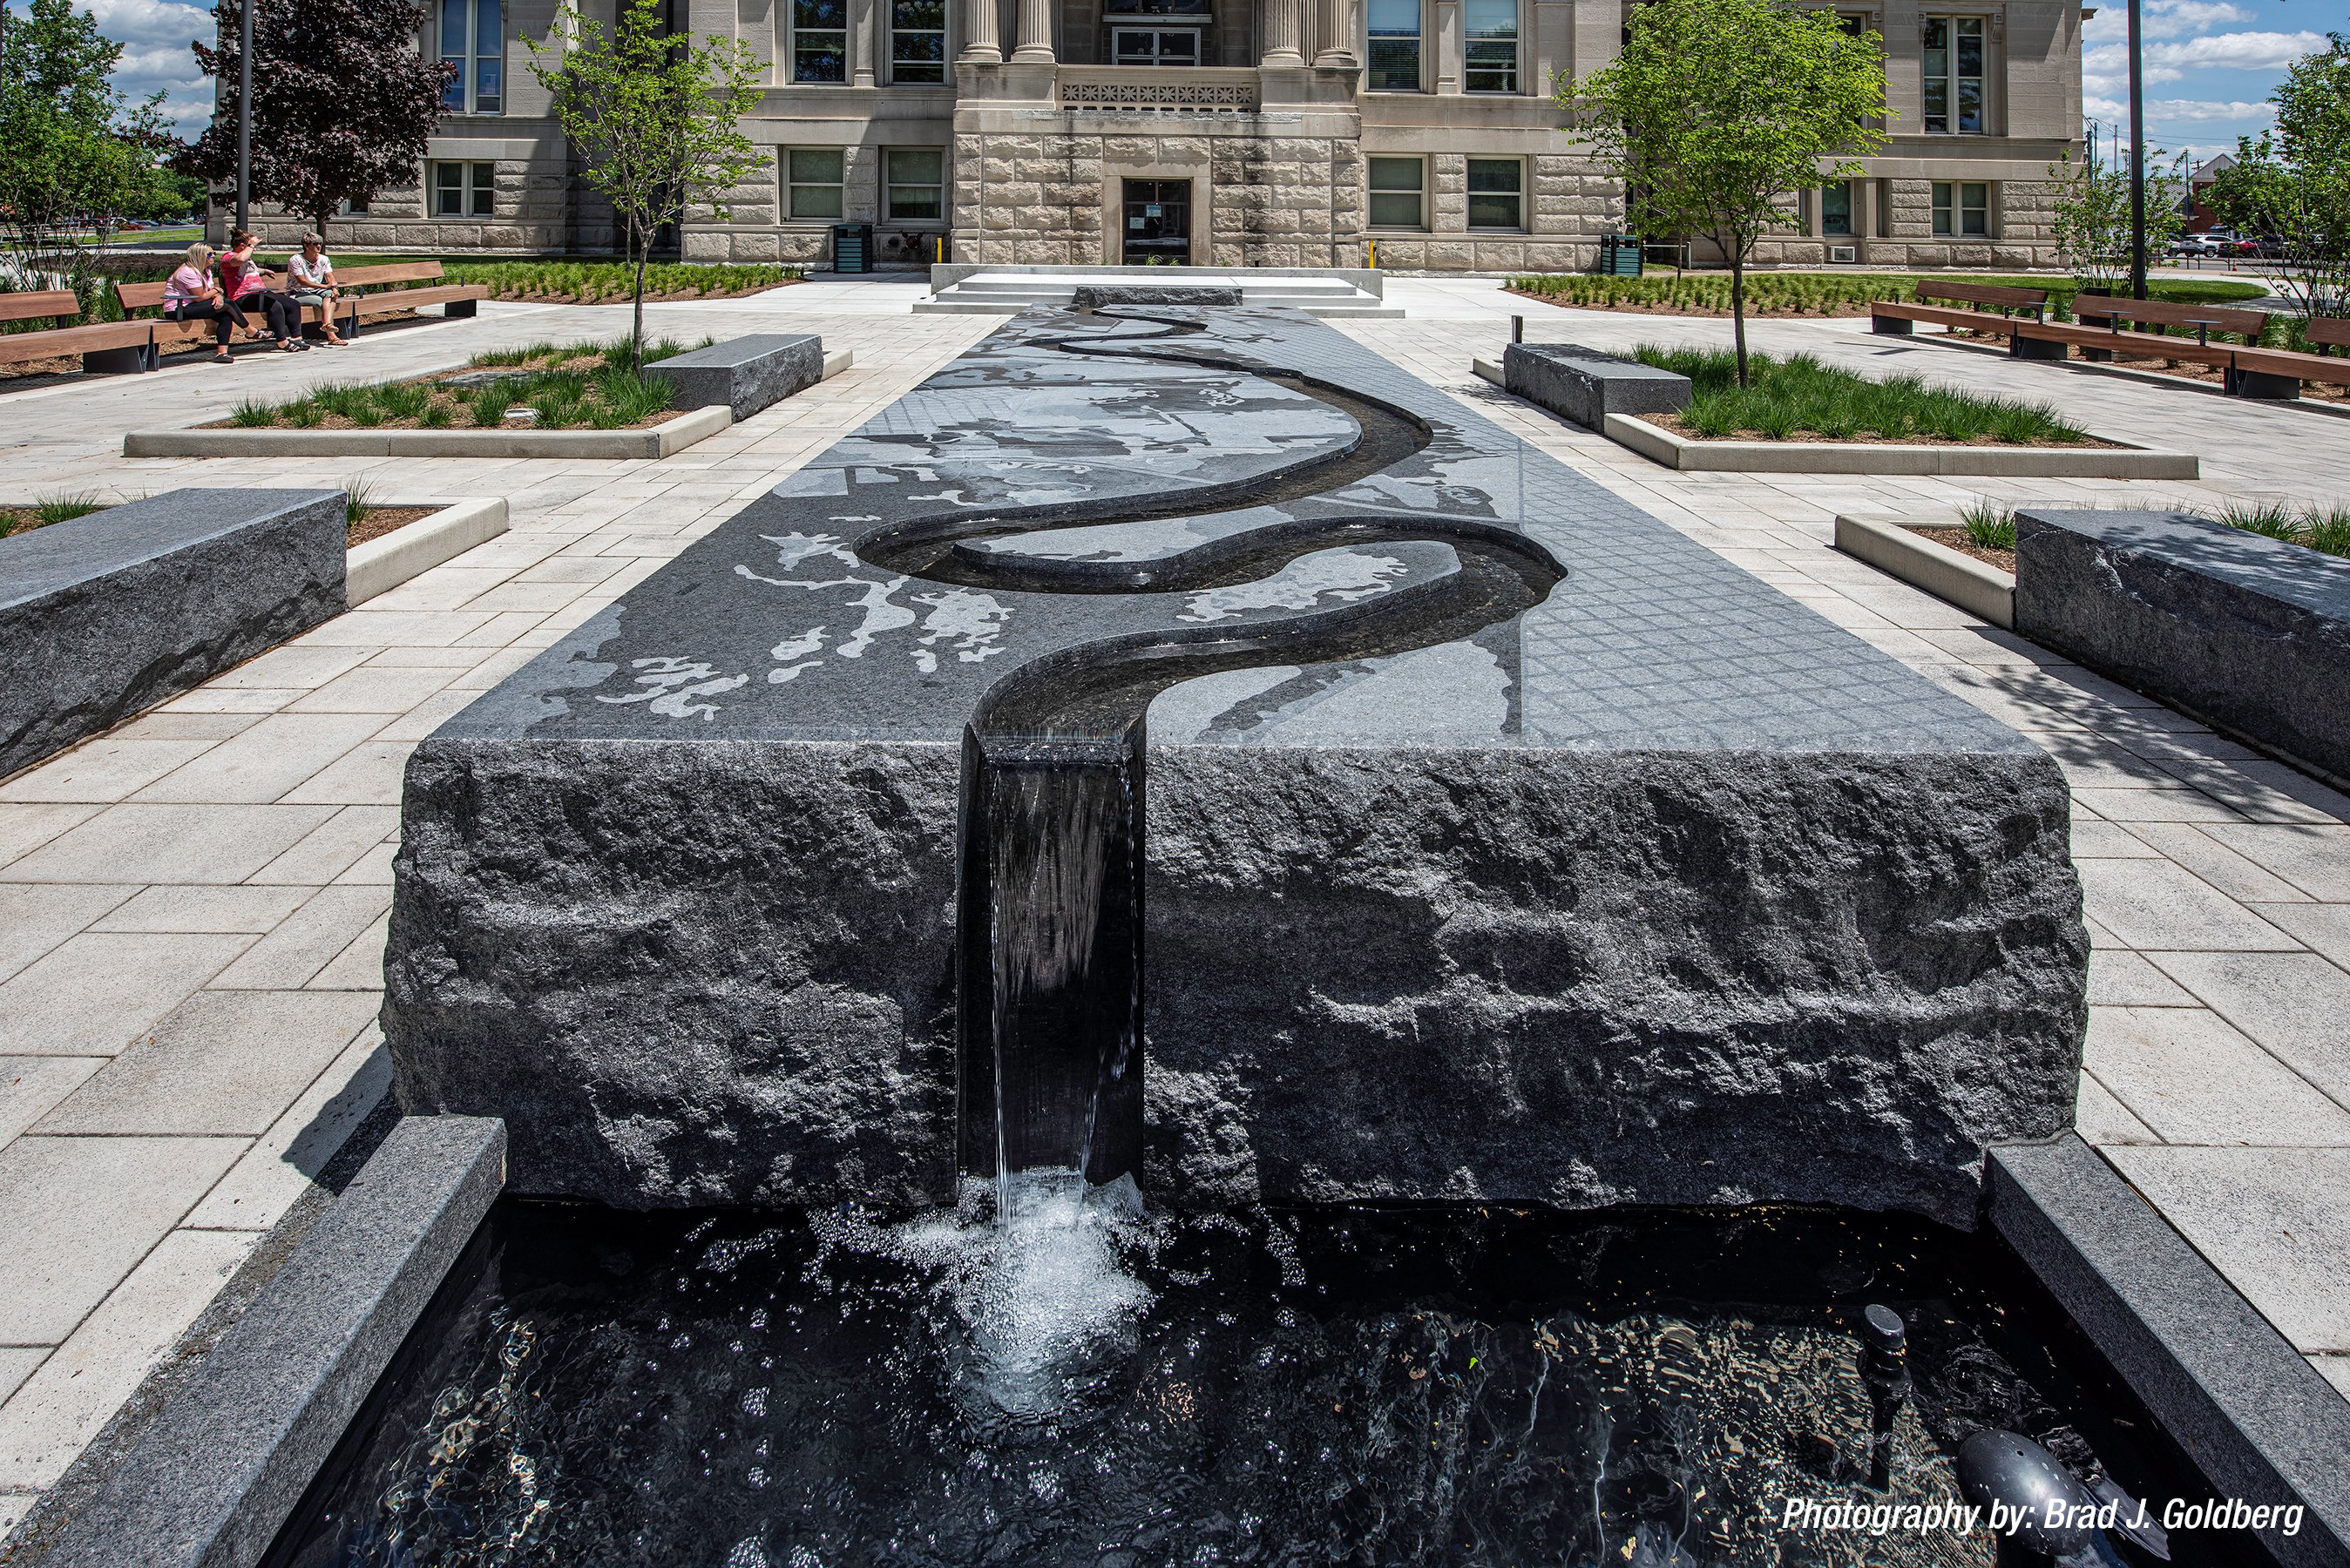 A close up view of the carved river runnel in the black granite fountain sculpture as is cascades into the basin below.